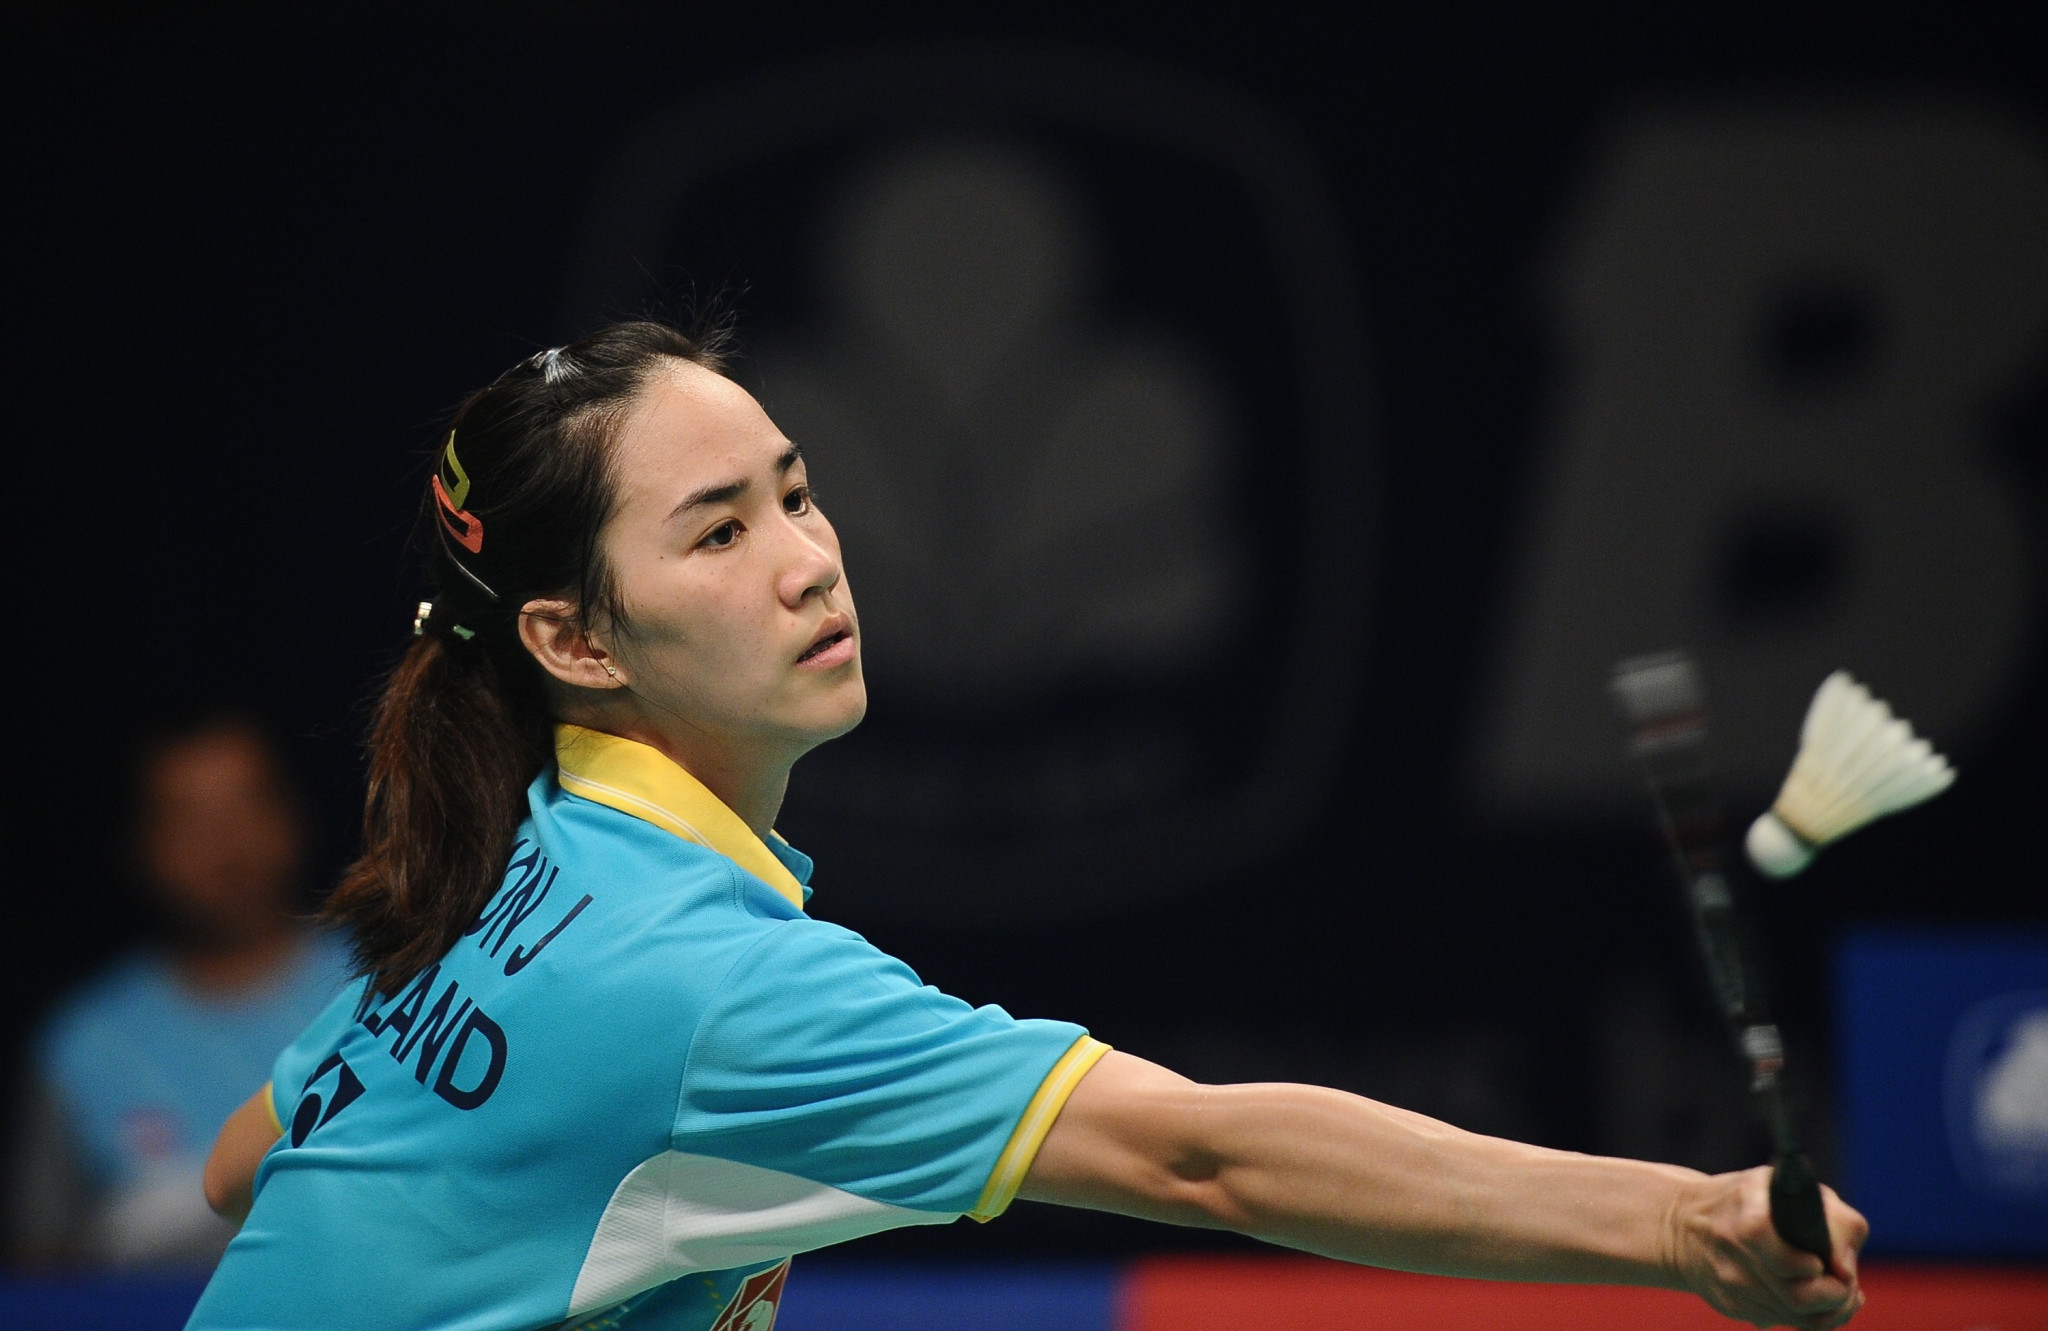 Nitchaon Jindapol is through to the final of the women's singles after a straight-forward victory in Germany today ©Getty Images